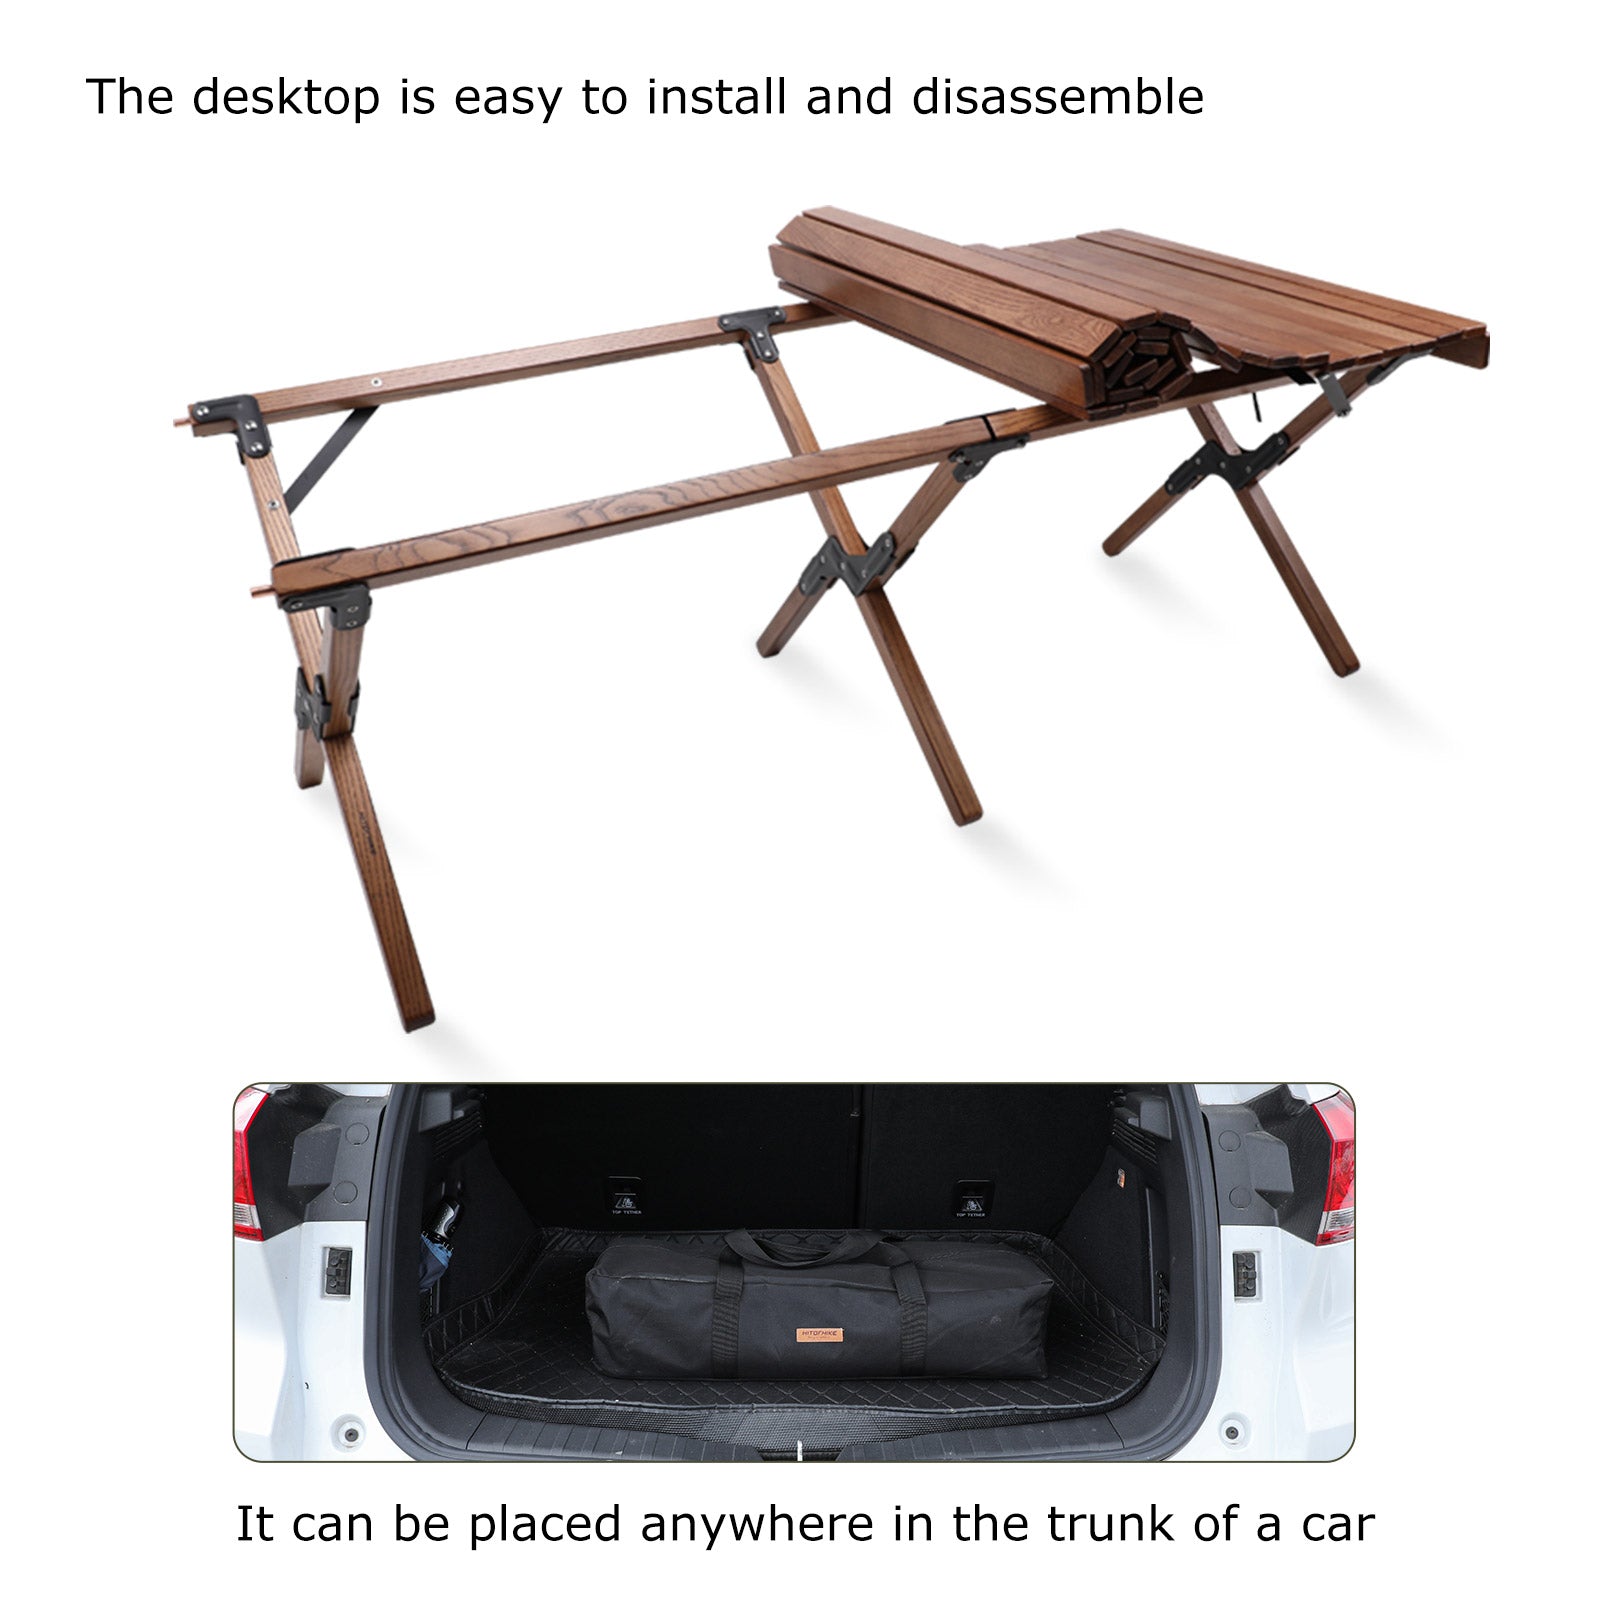 Hitorhike Folding Wood Table Portable Camping Table for Outdoor/Indoor Picnic,Travel,Beach,Camp,BBQ,Backyard